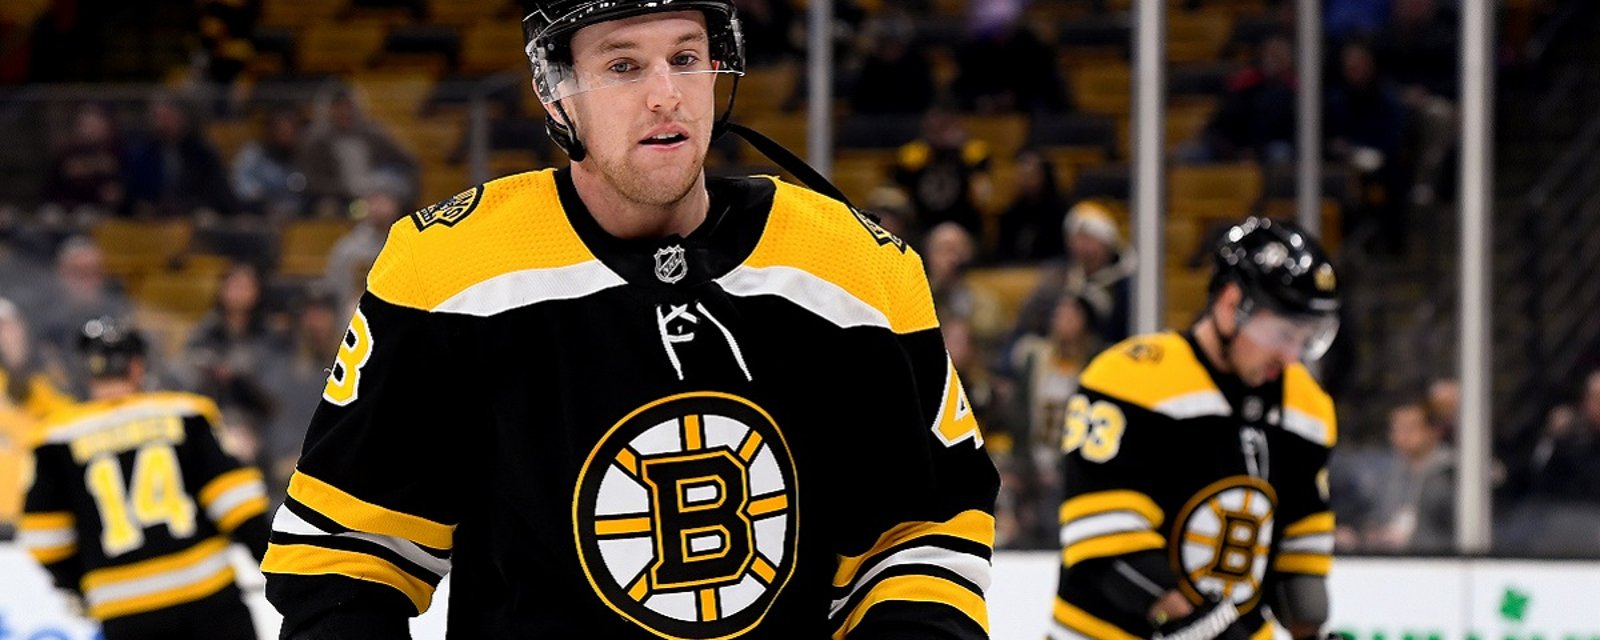 Some good and bad signs from Matt Grzelcyk at Bruins practice.